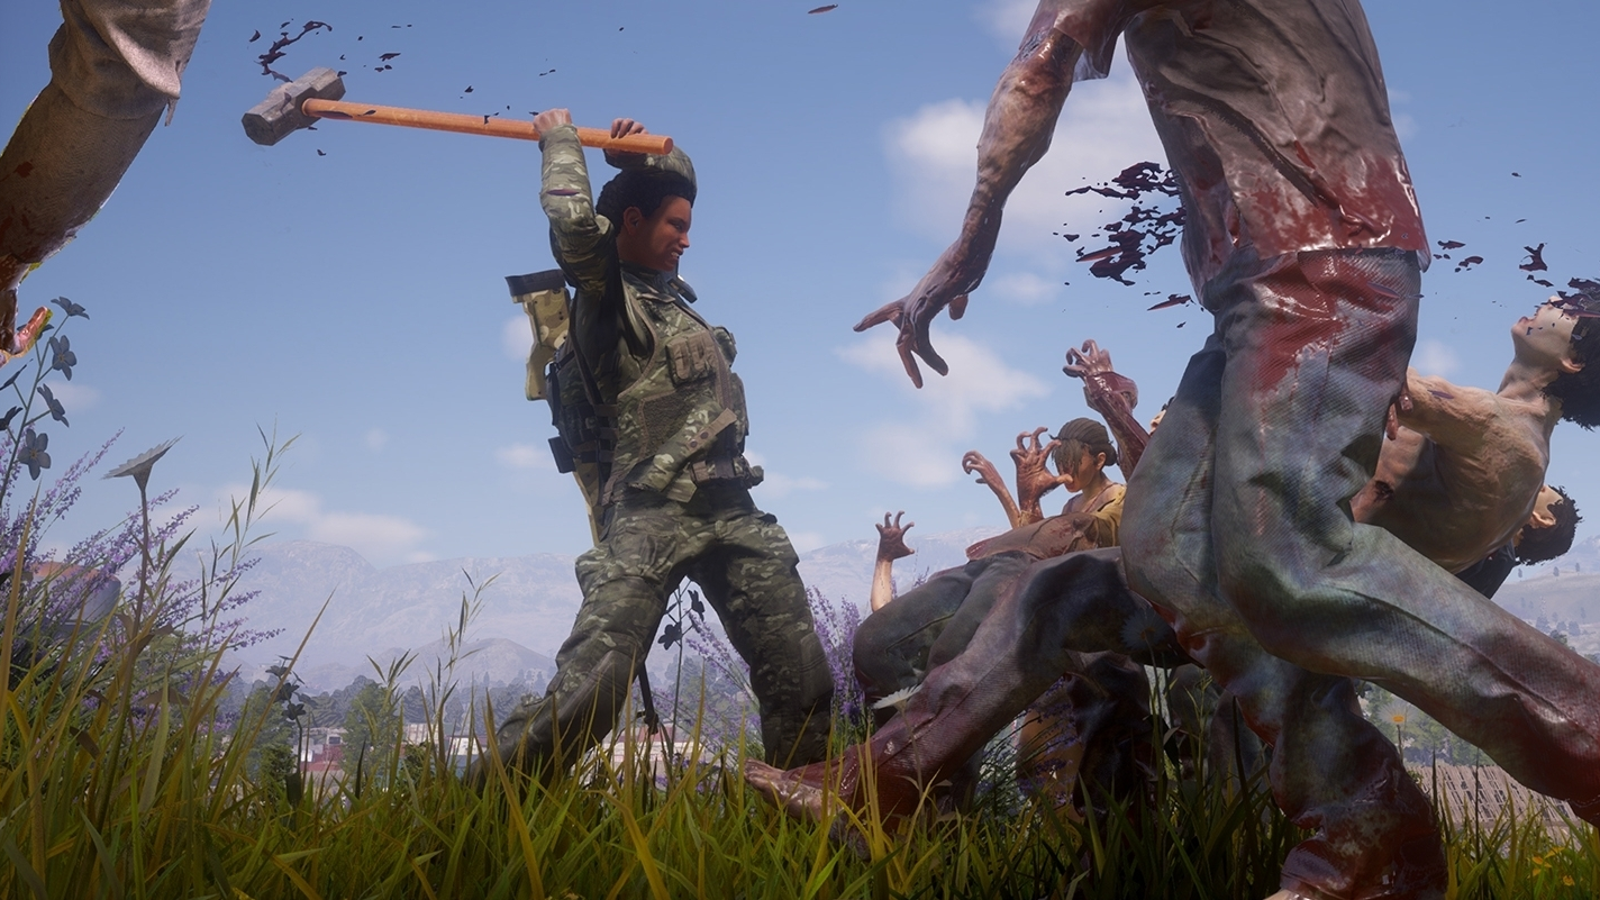 State of Decay 2 gets massive free overhaul next month with new